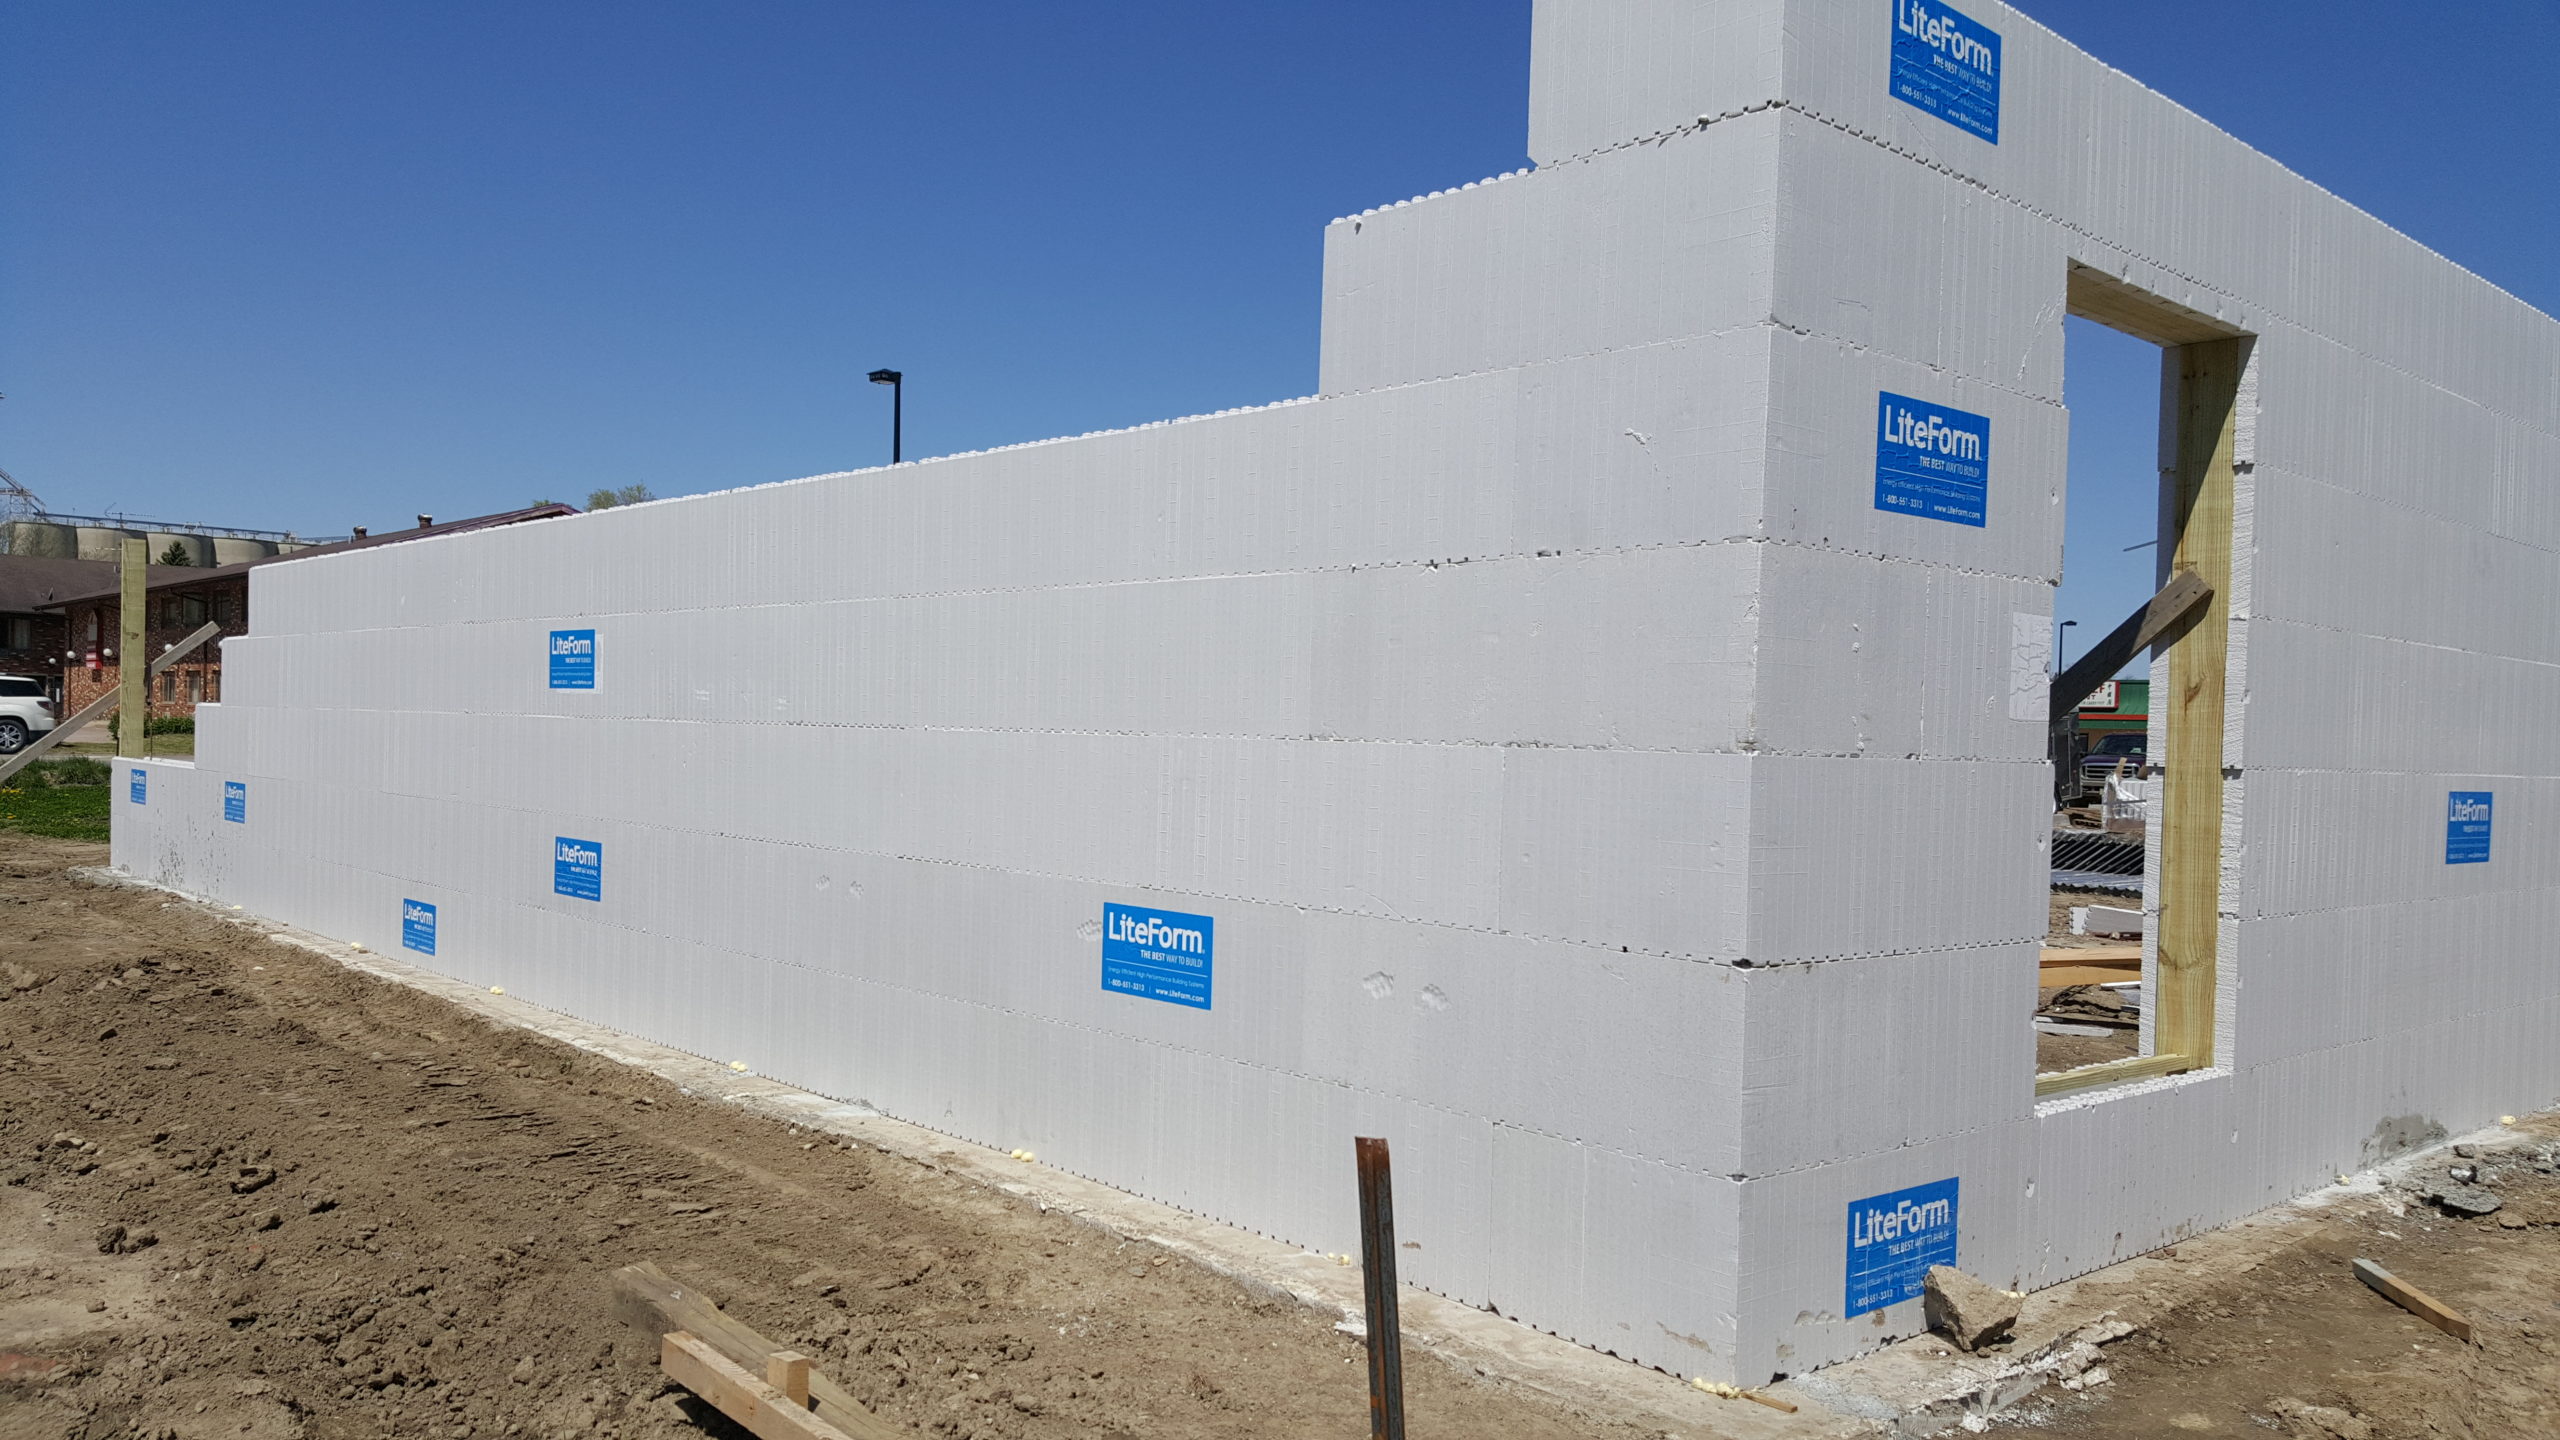 LiteForm walls were used for a building at the Prenger Strip Mall.